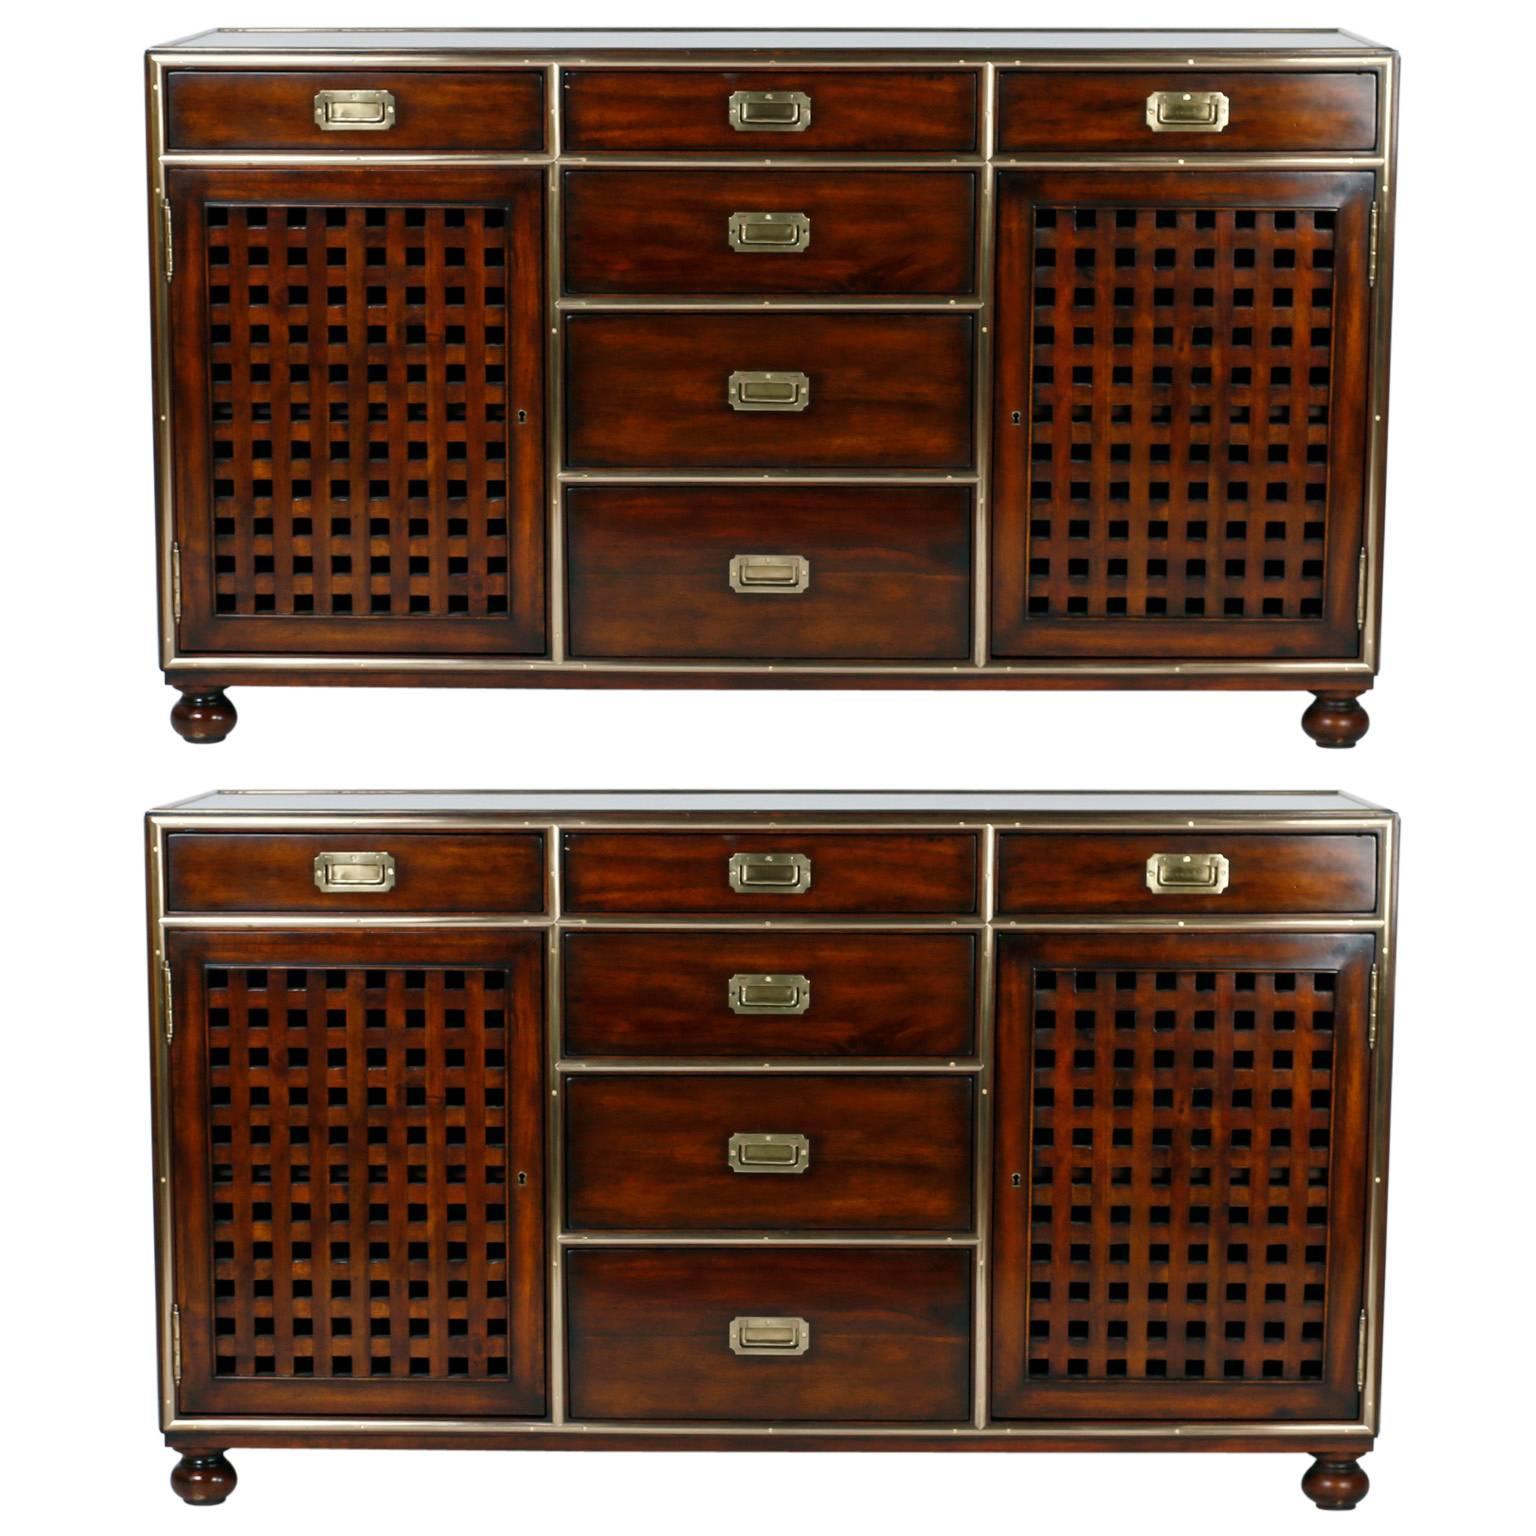 Pair of Campaign Style Credenzas or Cabinets